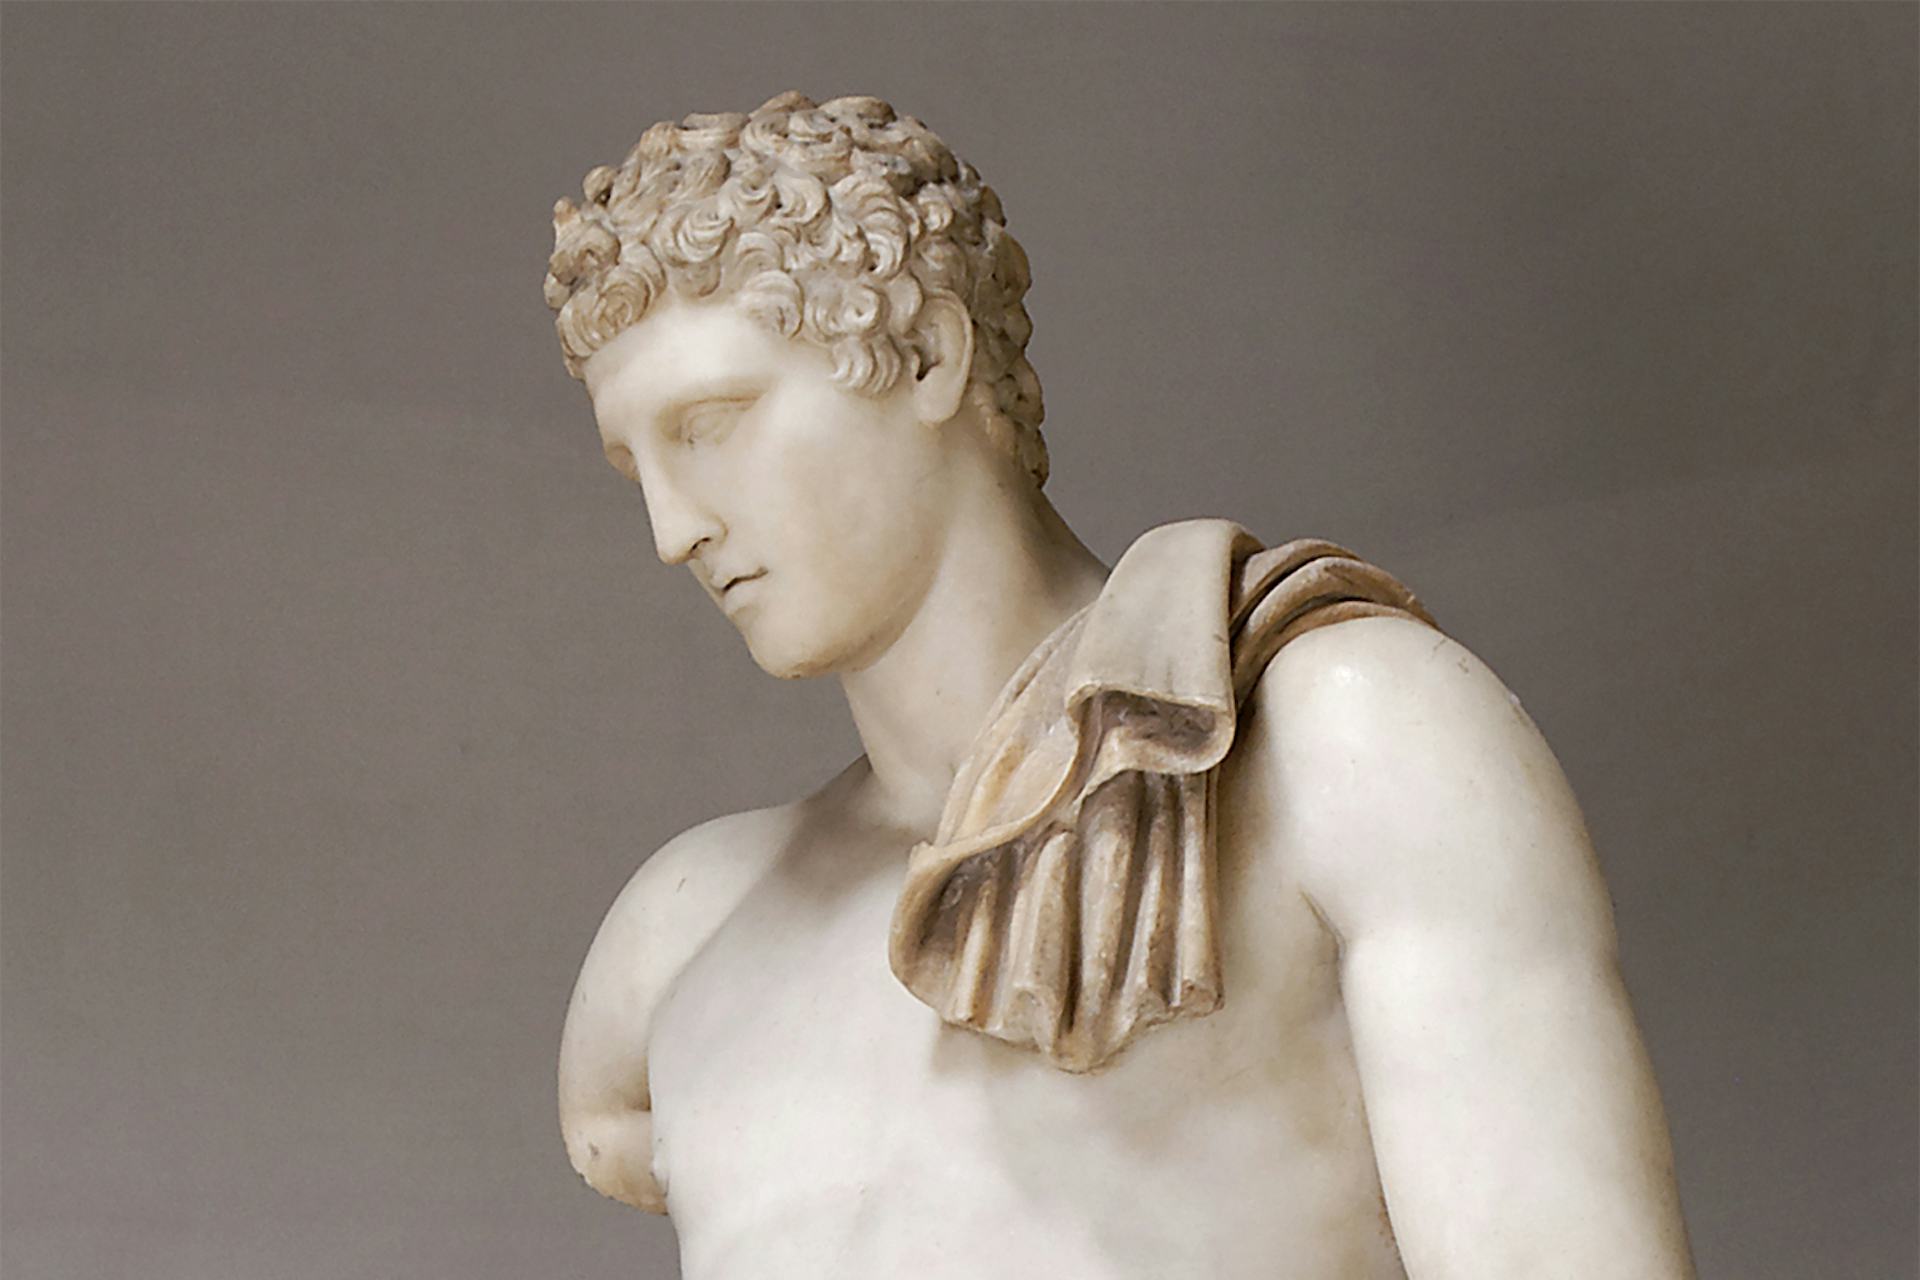 do the differences between perseus and other humans define him